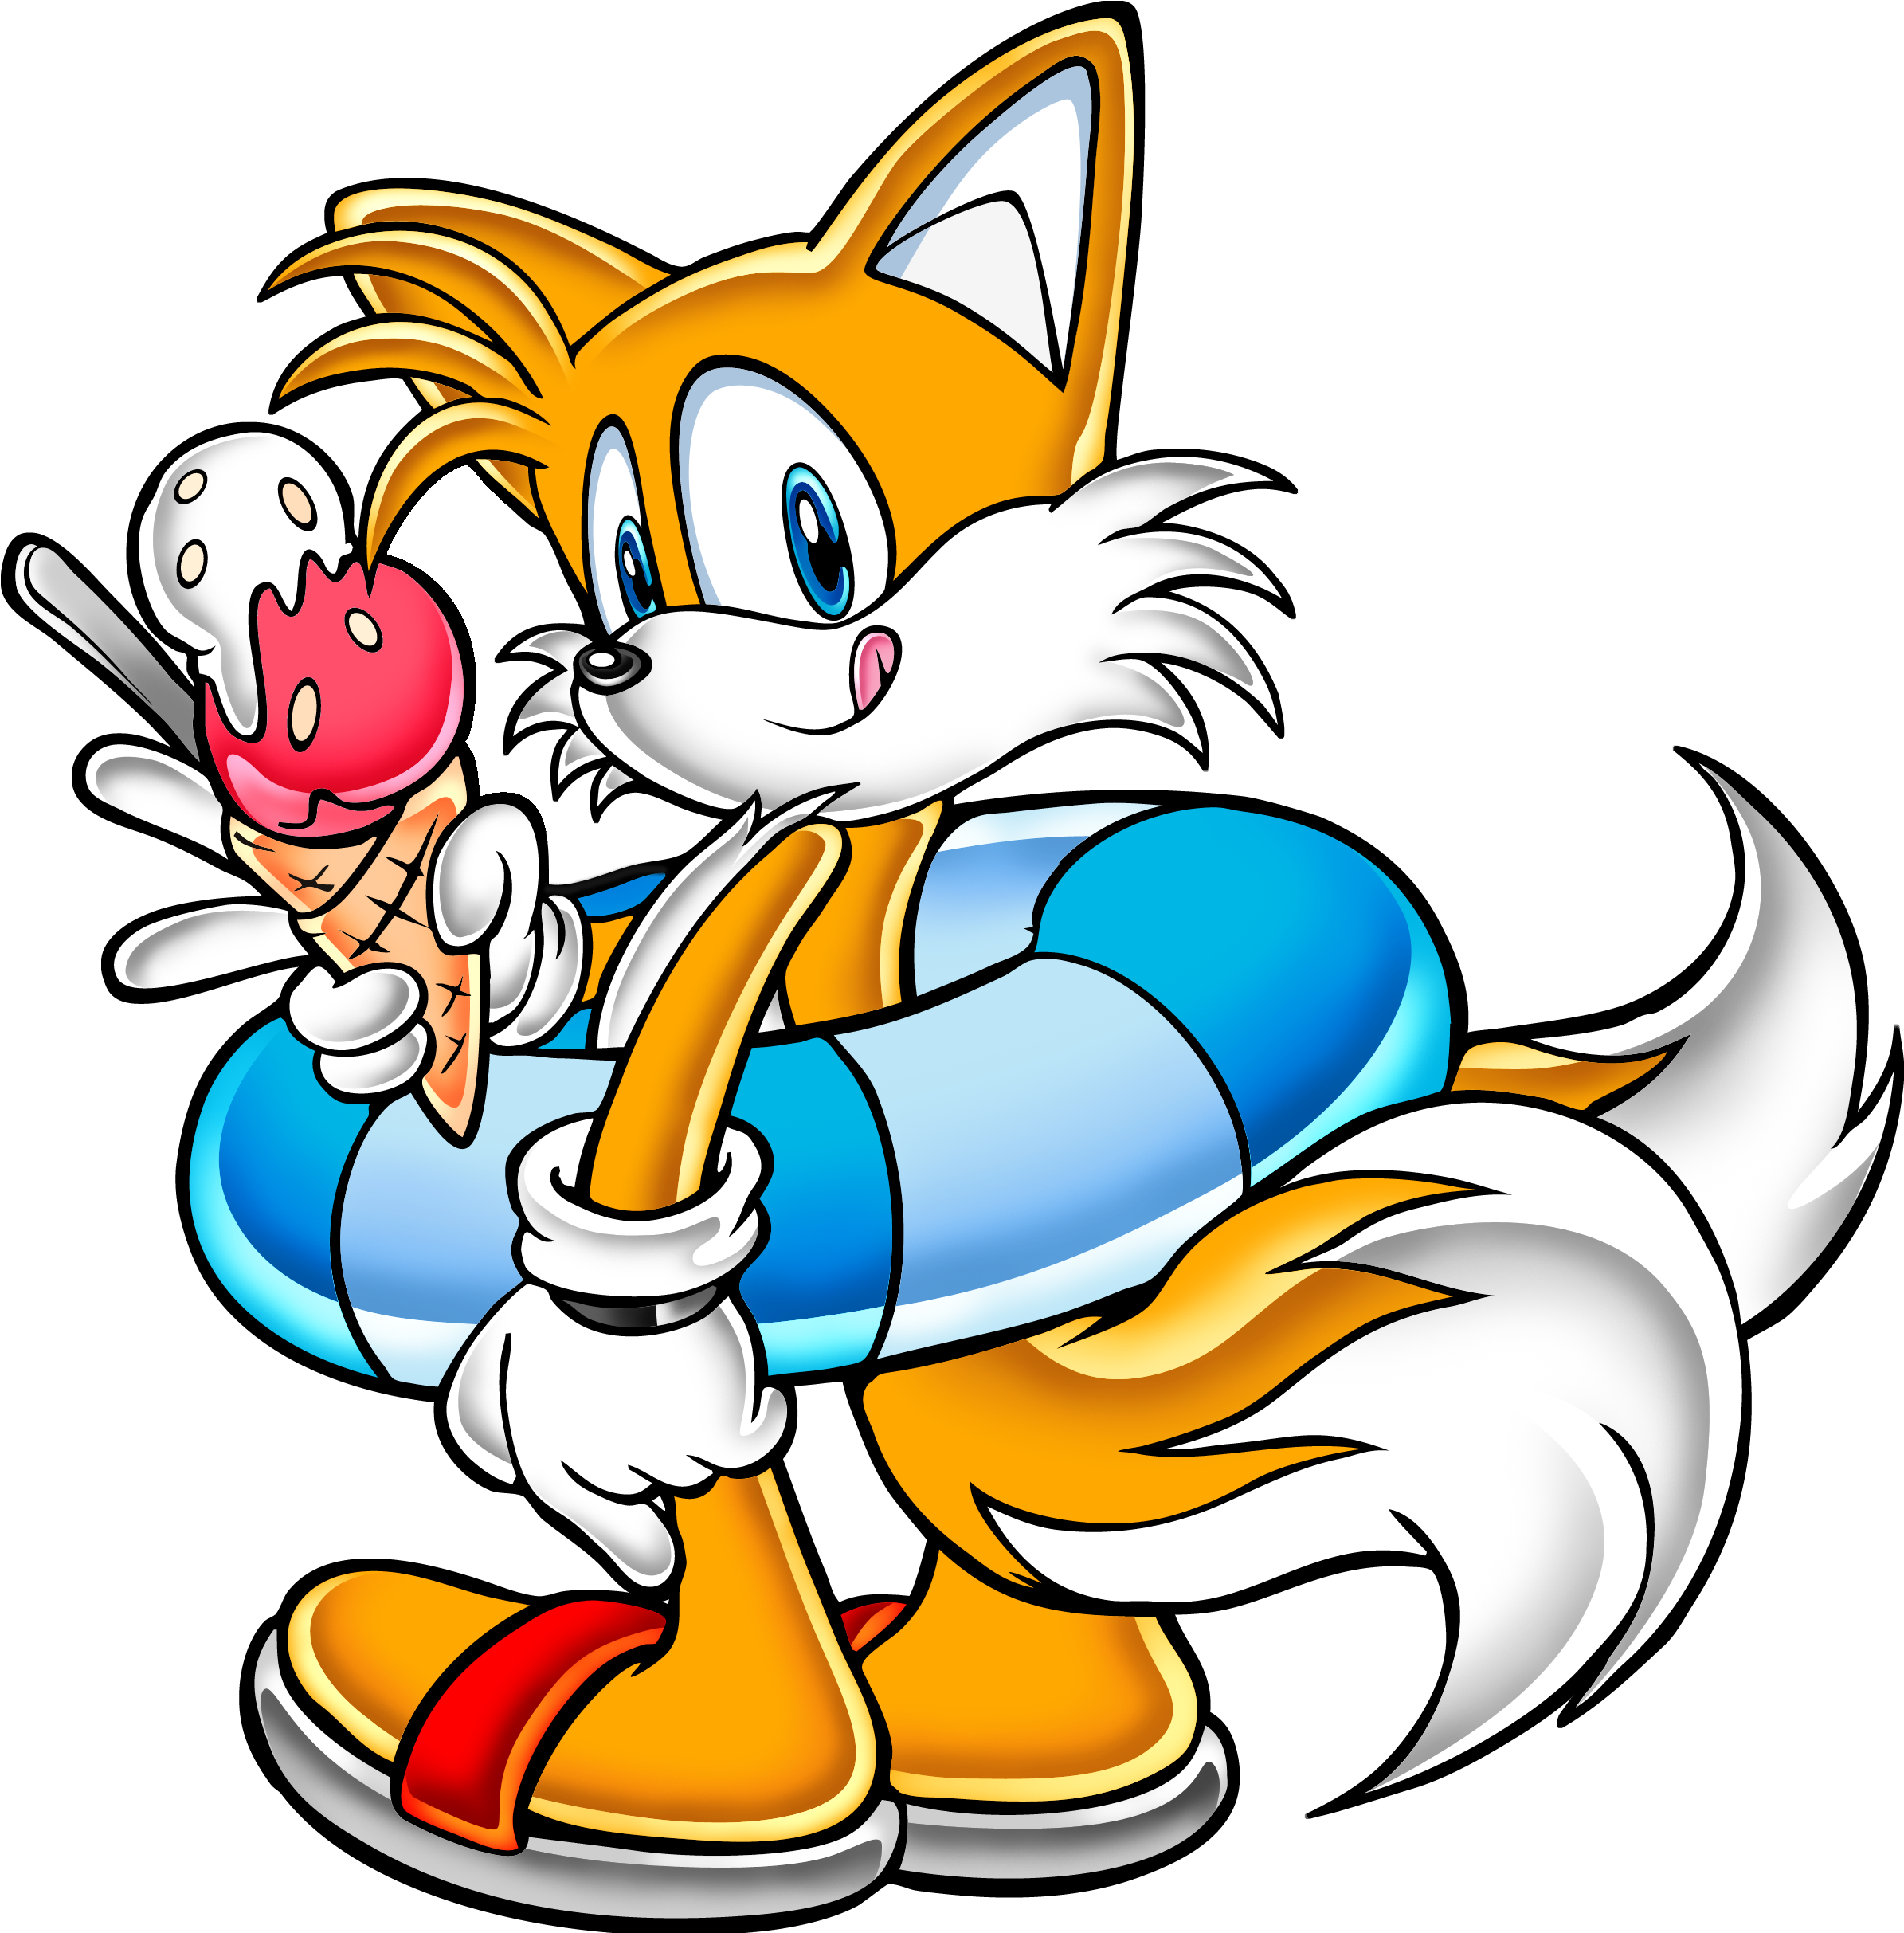 Tails 27 - Tails The Fox (2390x2426)